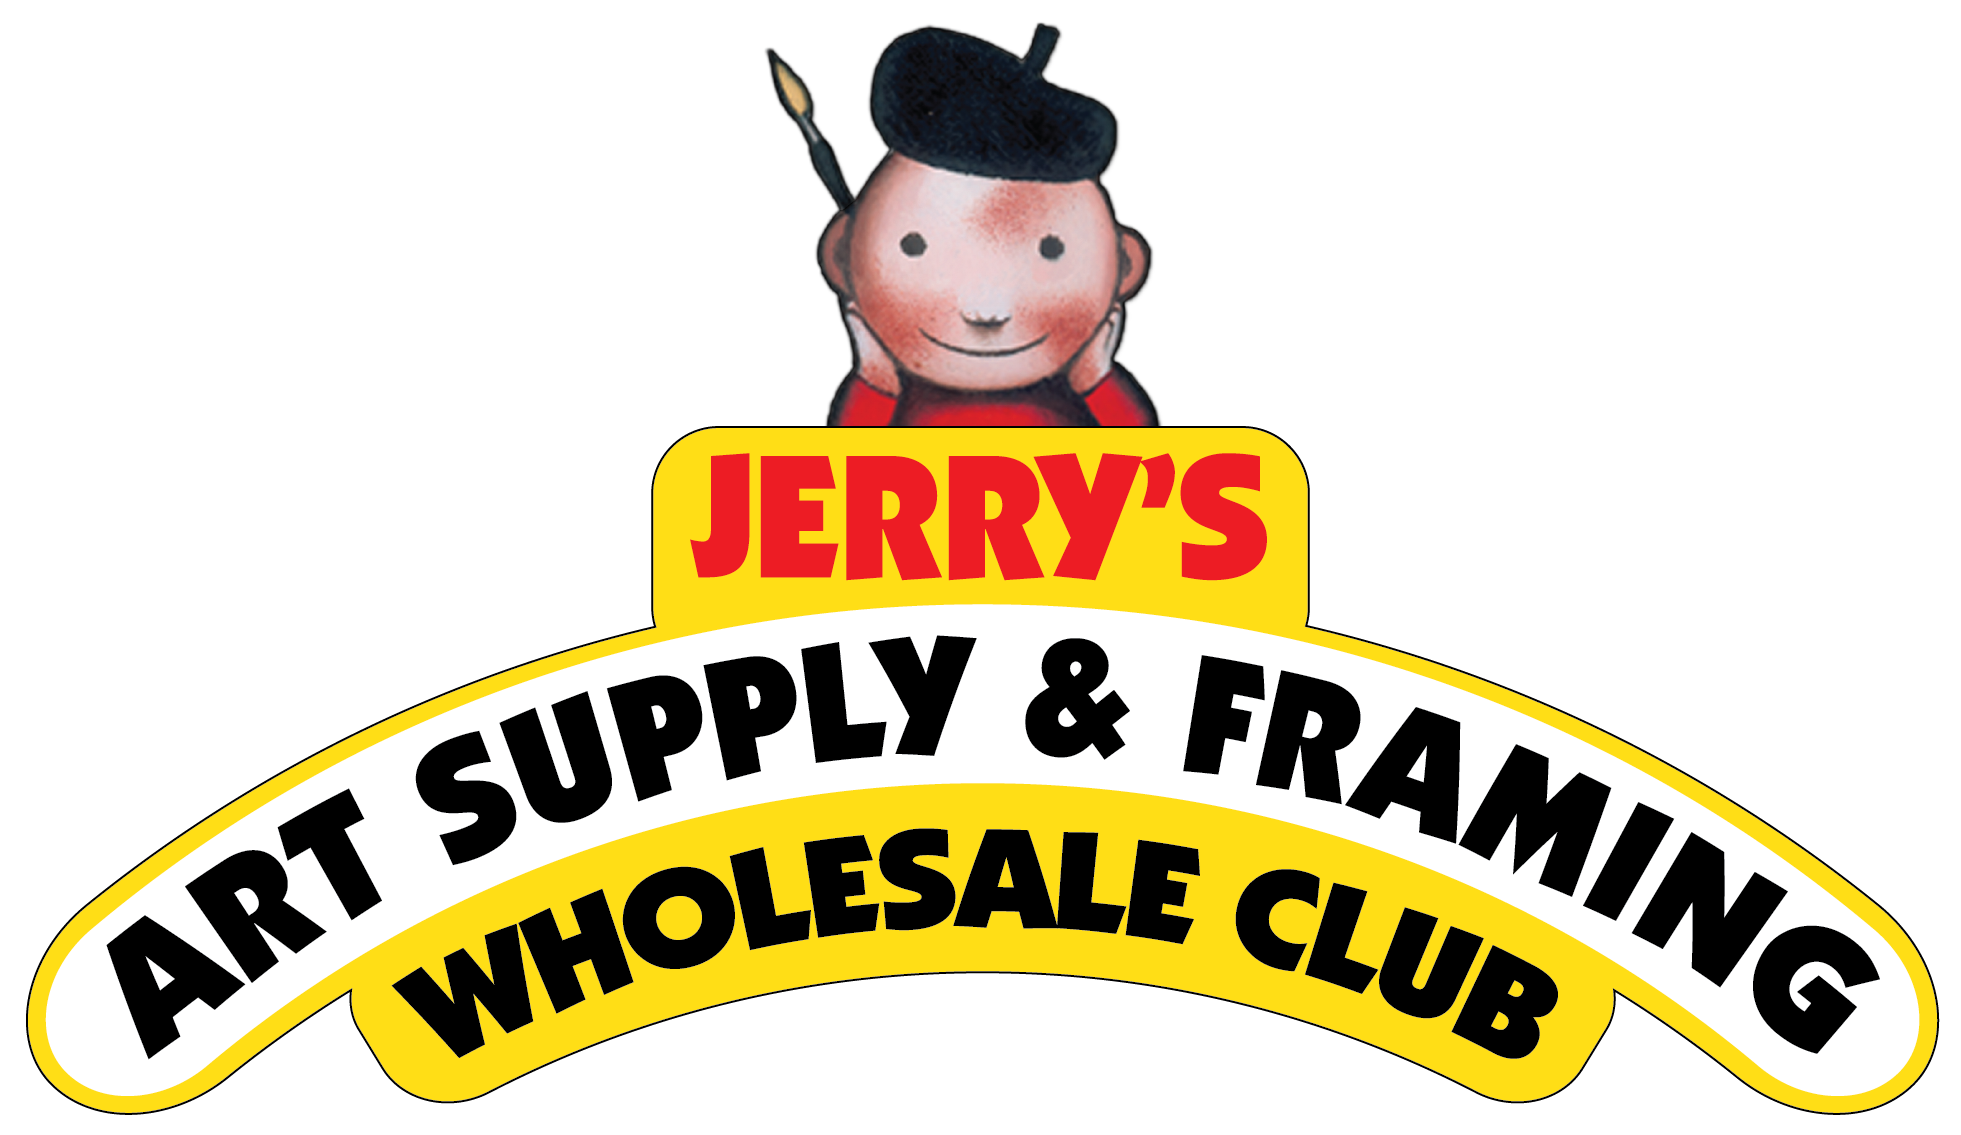 Jerry's Art Supply Wholesale Club of Jacksonville